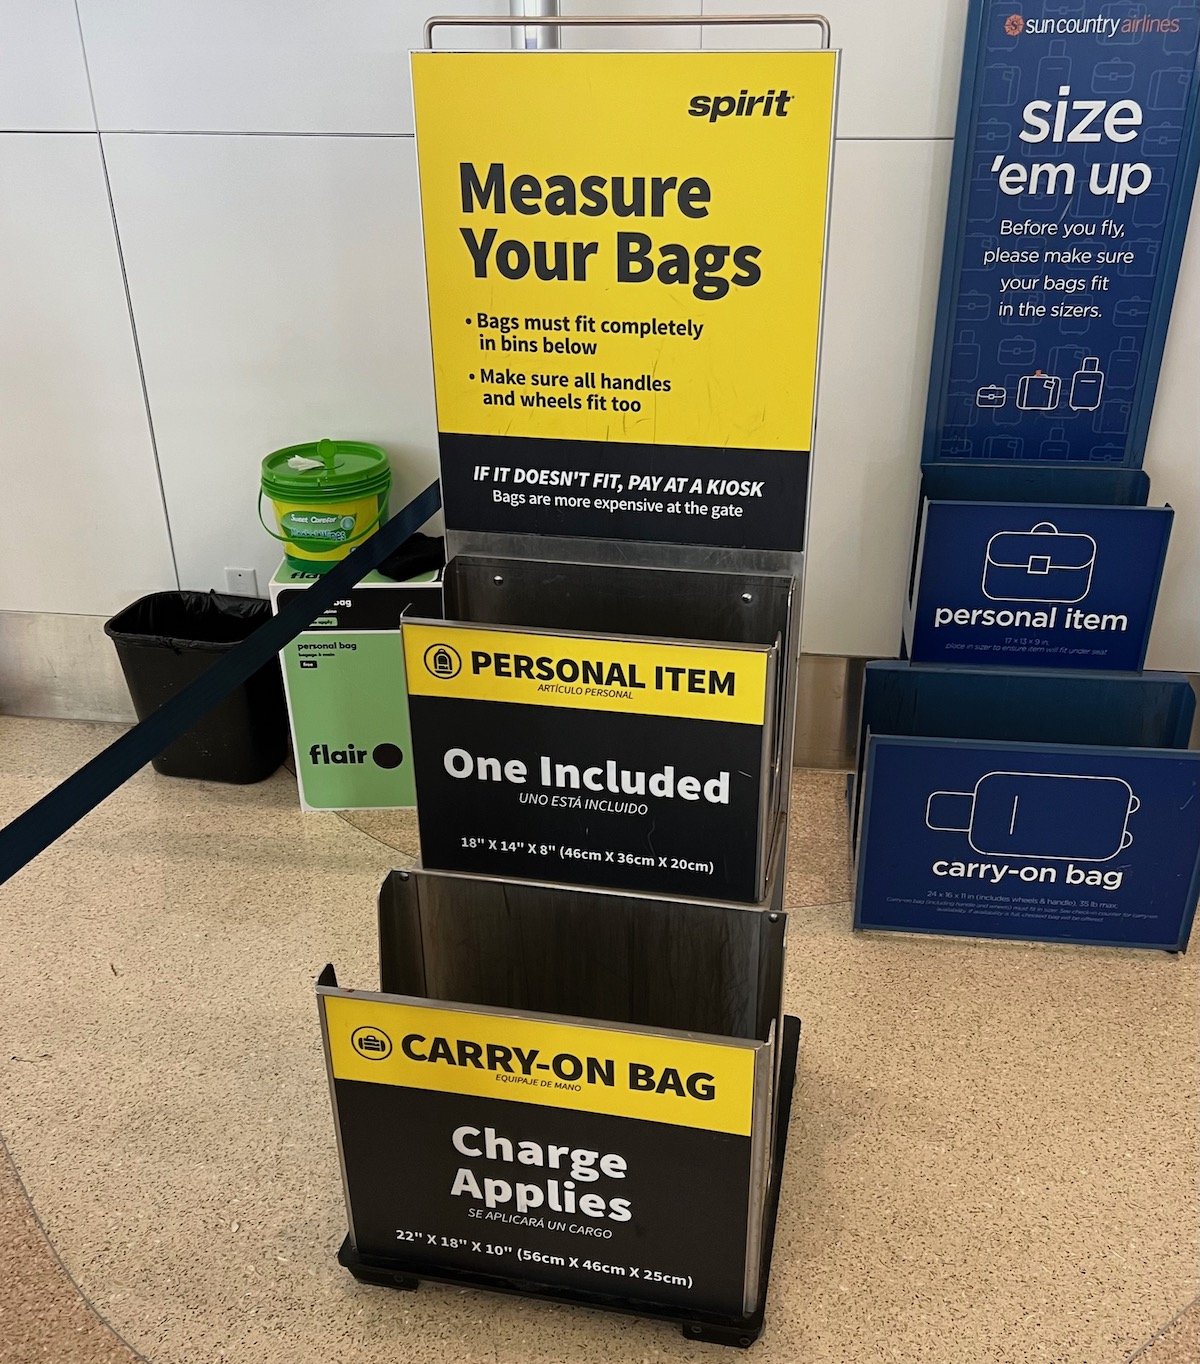 Spirit Airlines: 9 Tips For Having A Good Experience - One Mile at a Time